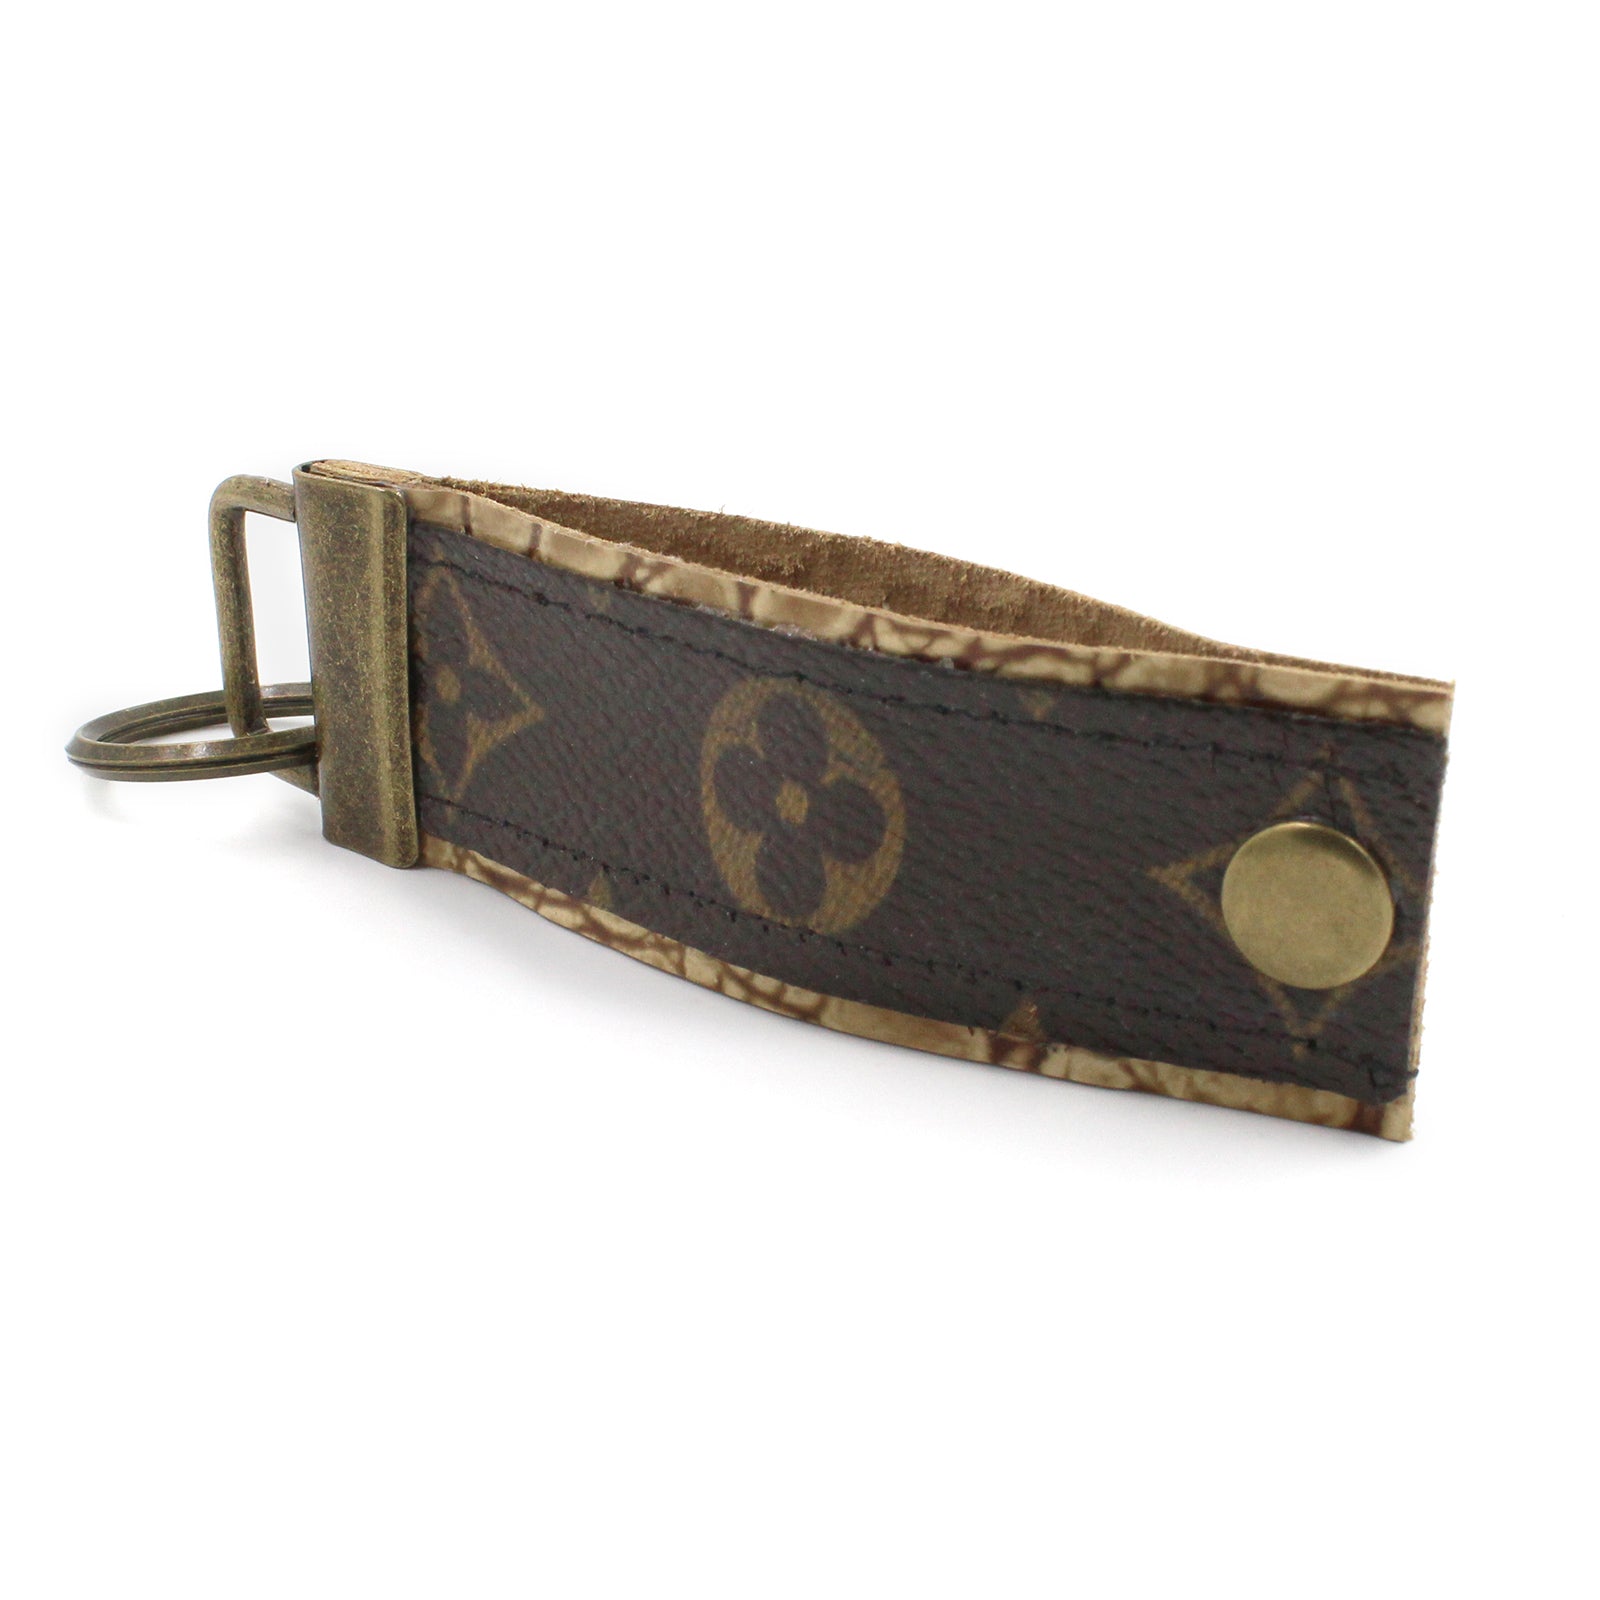 Repurposed luxury dog collar made from authentic upcycled Louis